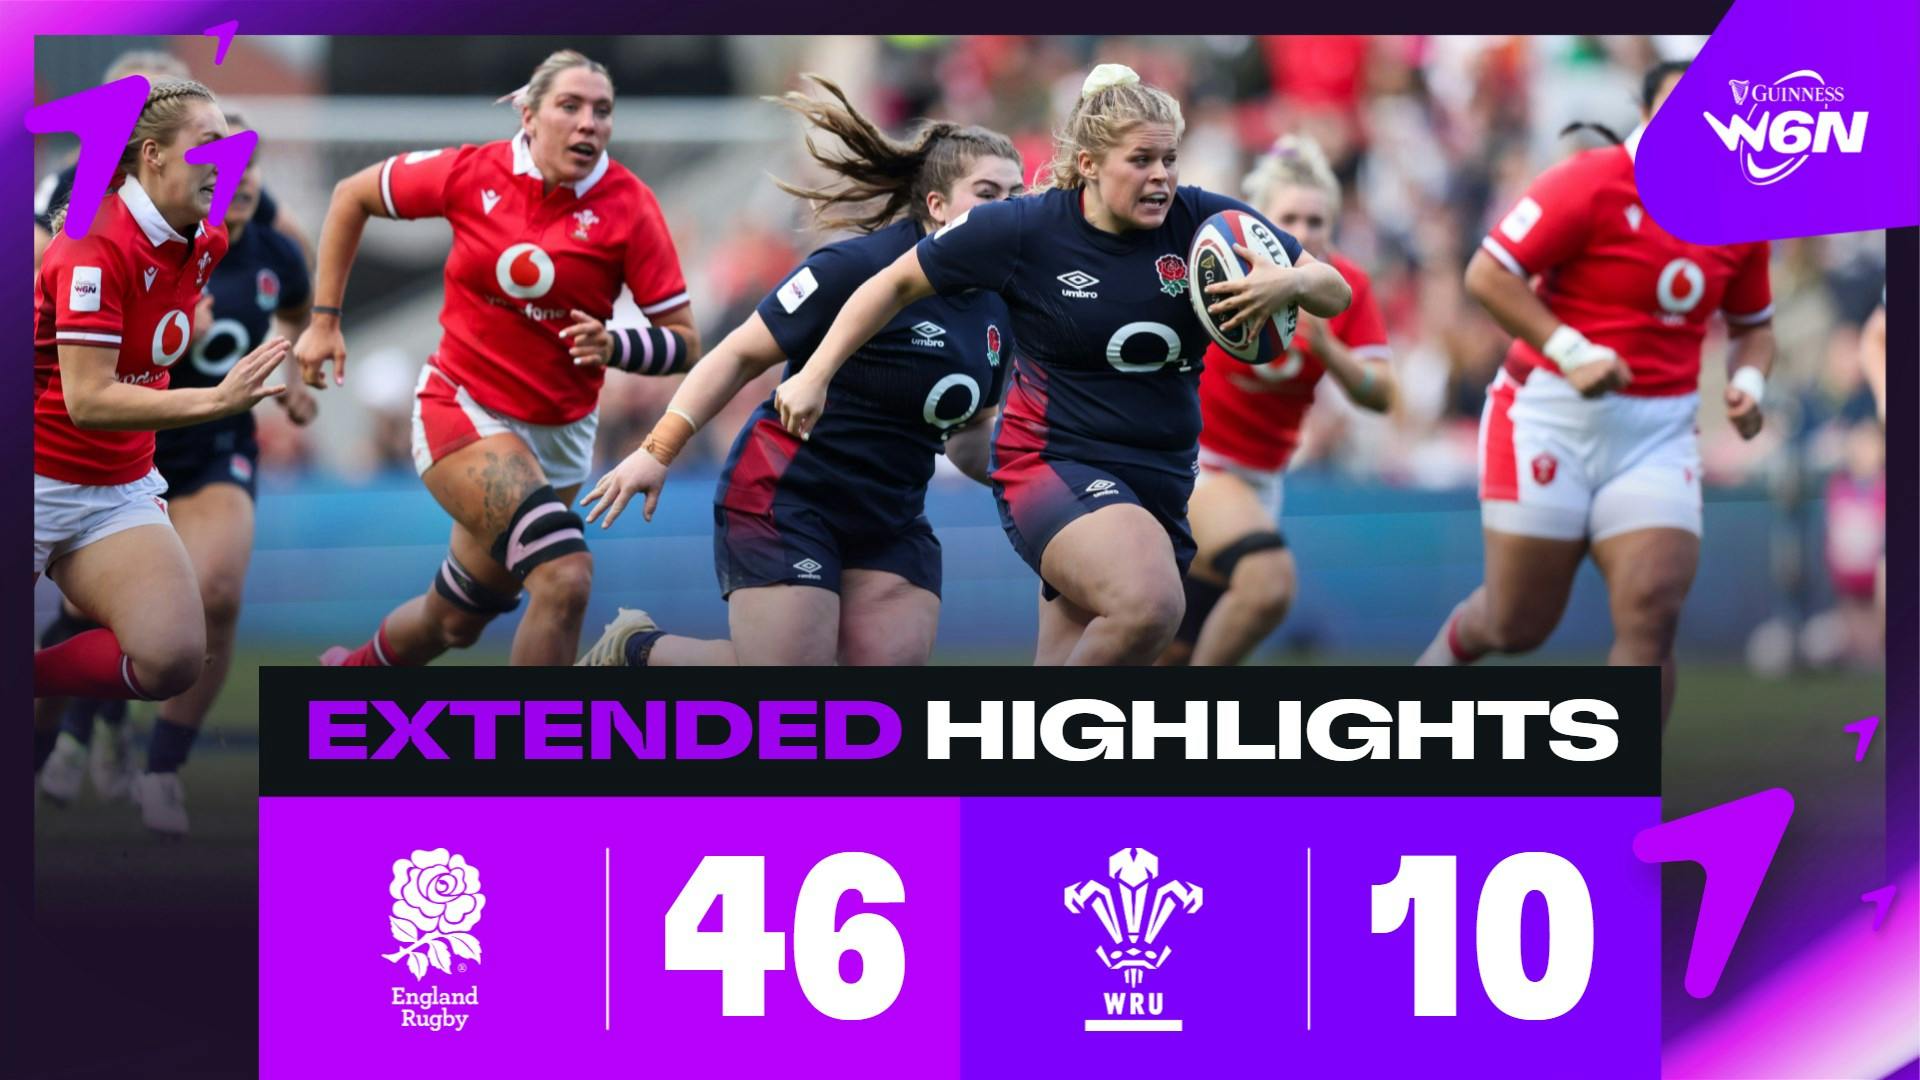 EXTENDED HIGHLIGHTS | GUINNESS WOMEN'S SIX NATIONS | ENGLAND V WALES